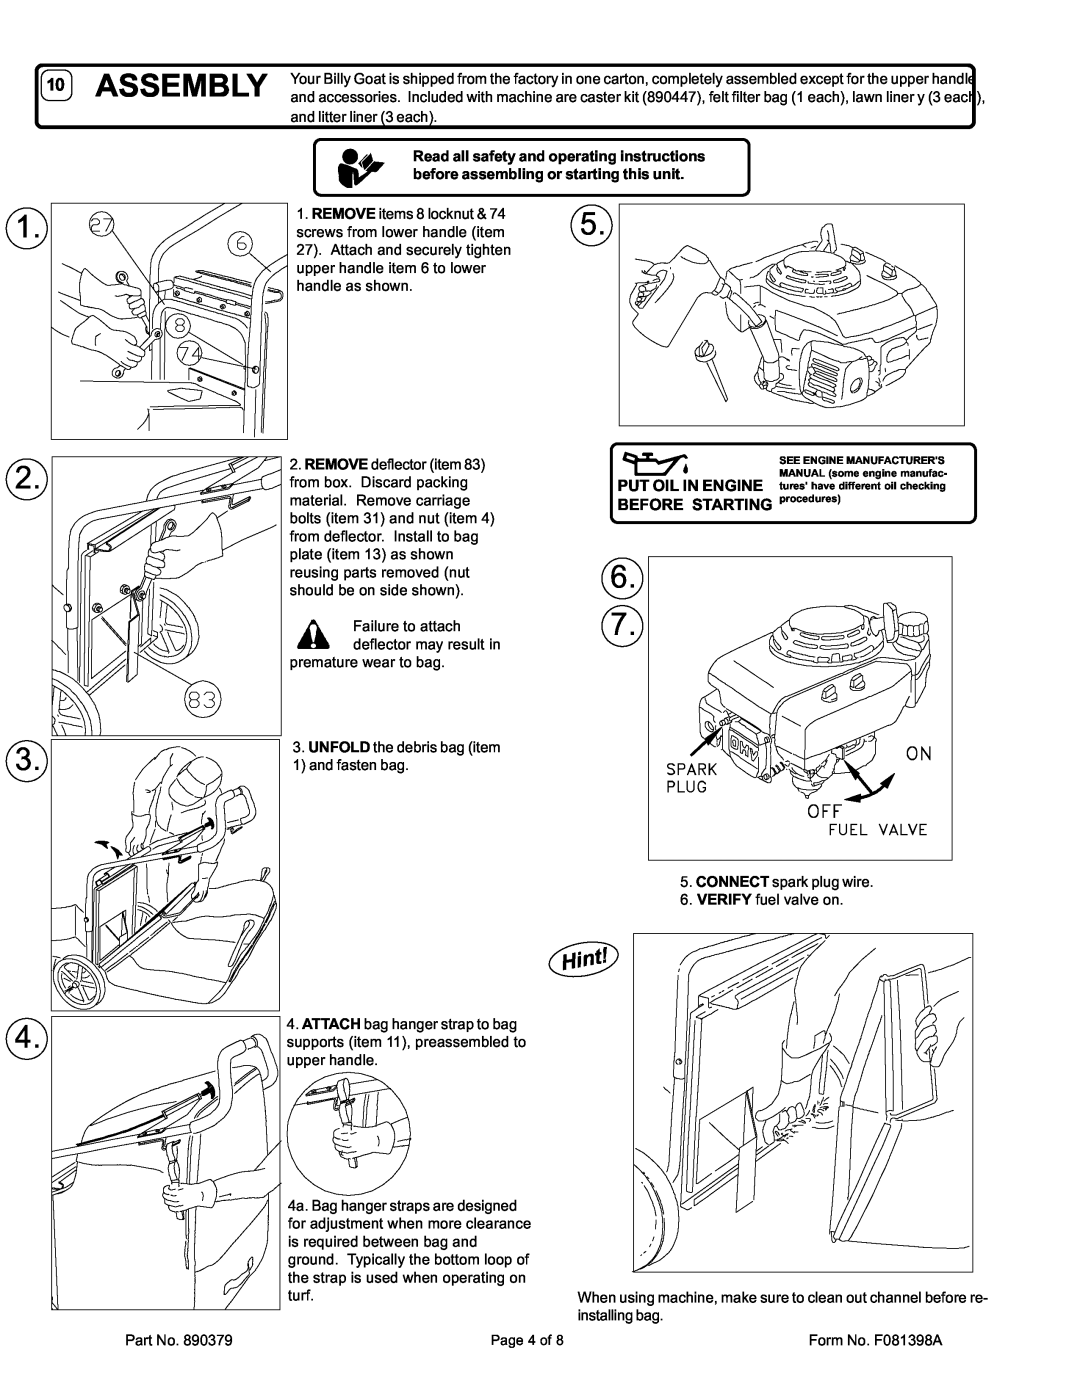 Billy Goat SV50H owner manual Assembly, BEFORE STARTING procedures 